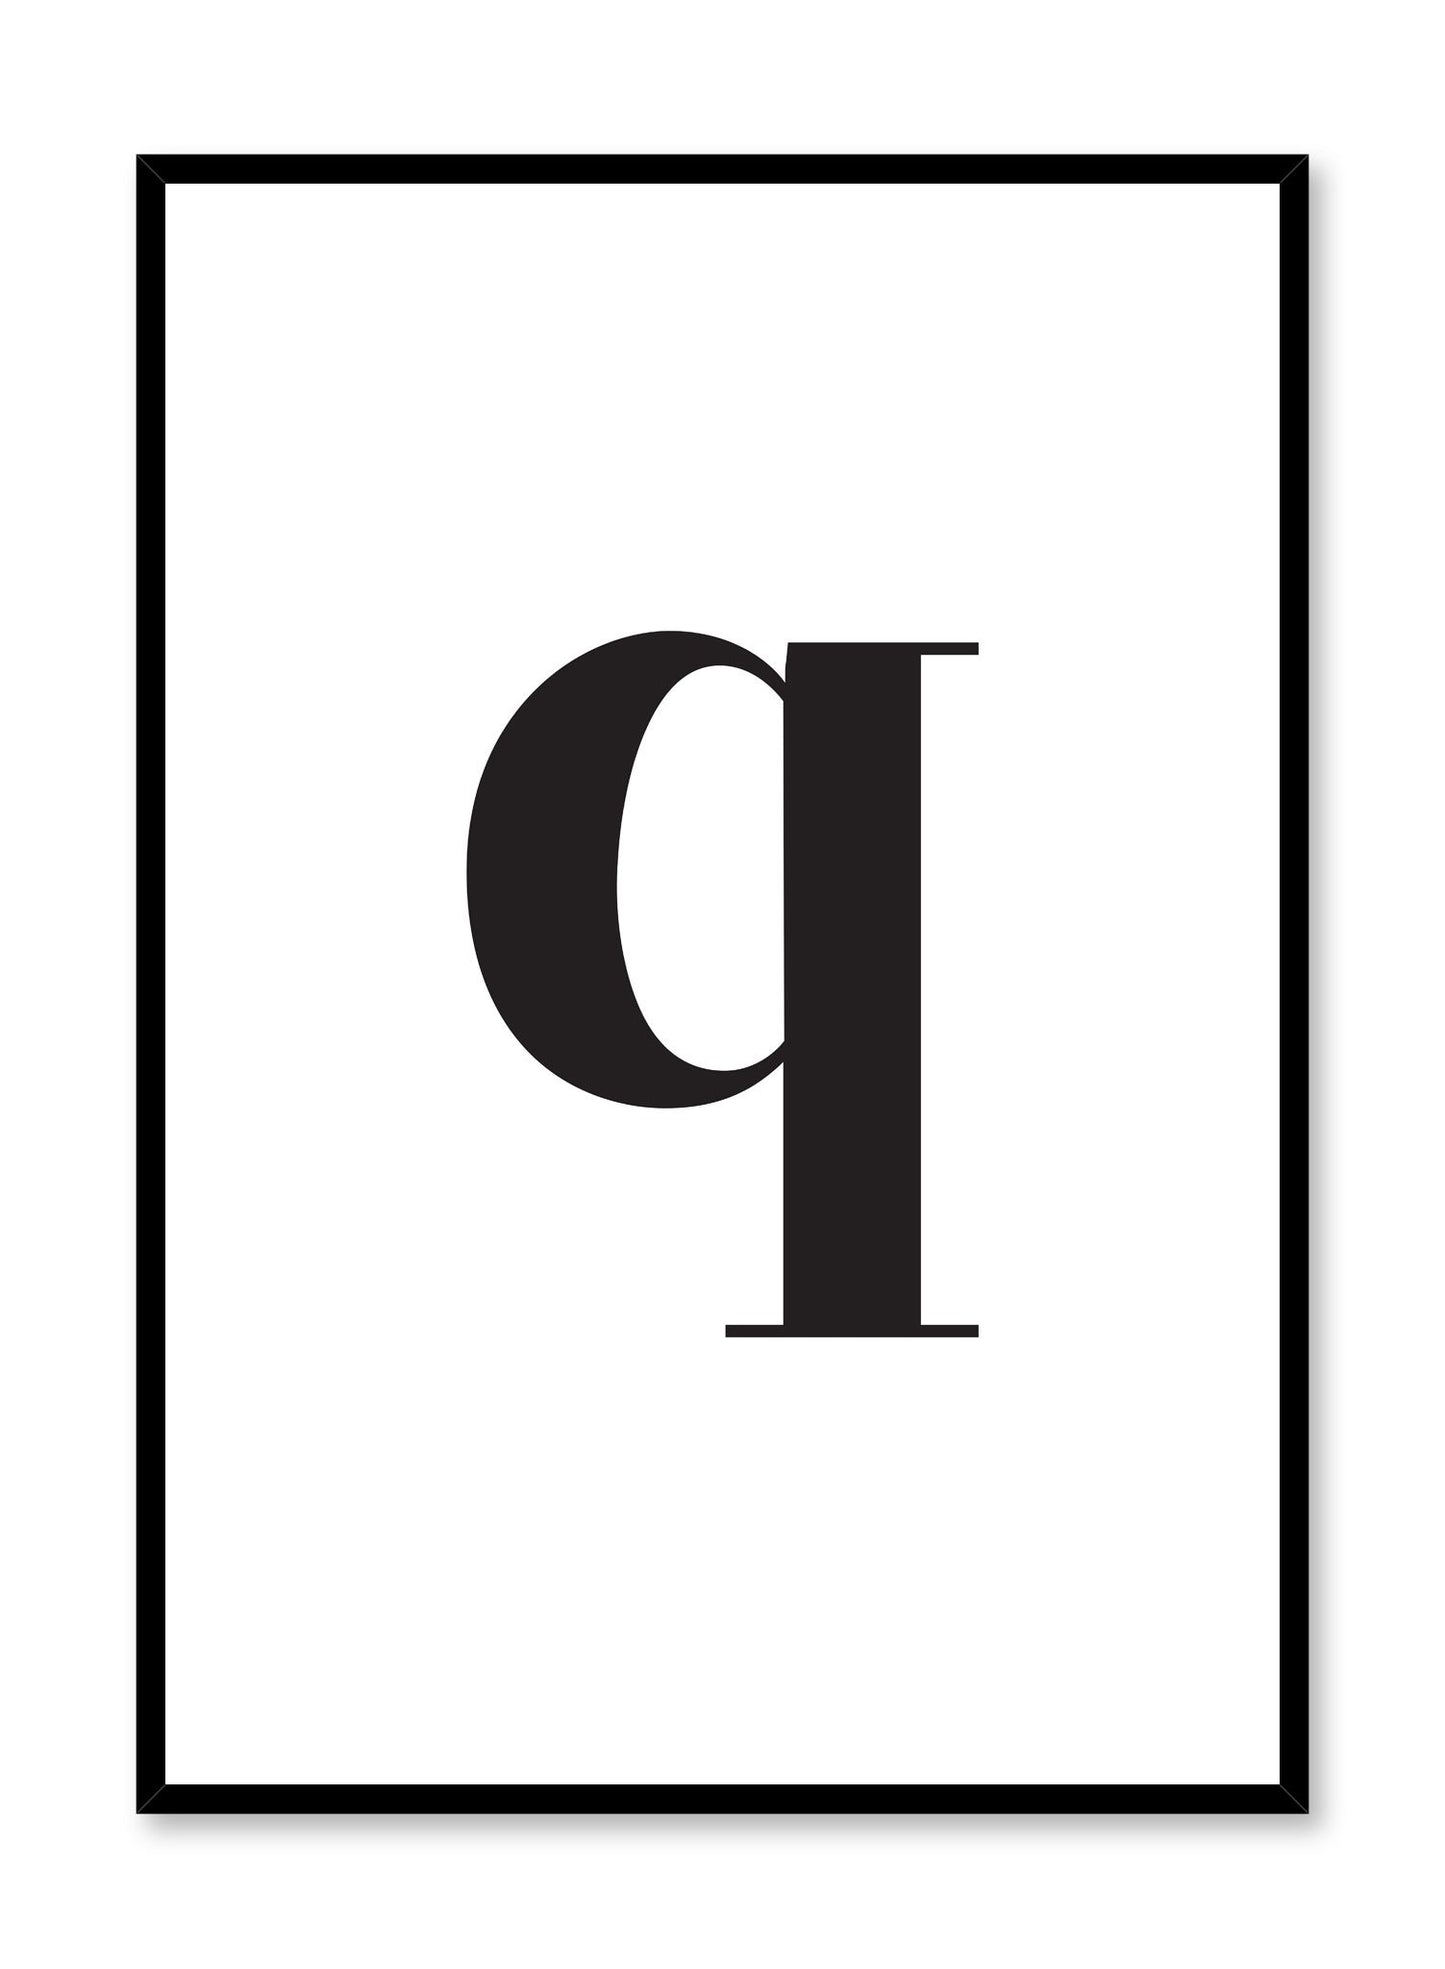 Scandinavian poster with black and white graphic typography design of lowercase letter Q by Opposite Wall